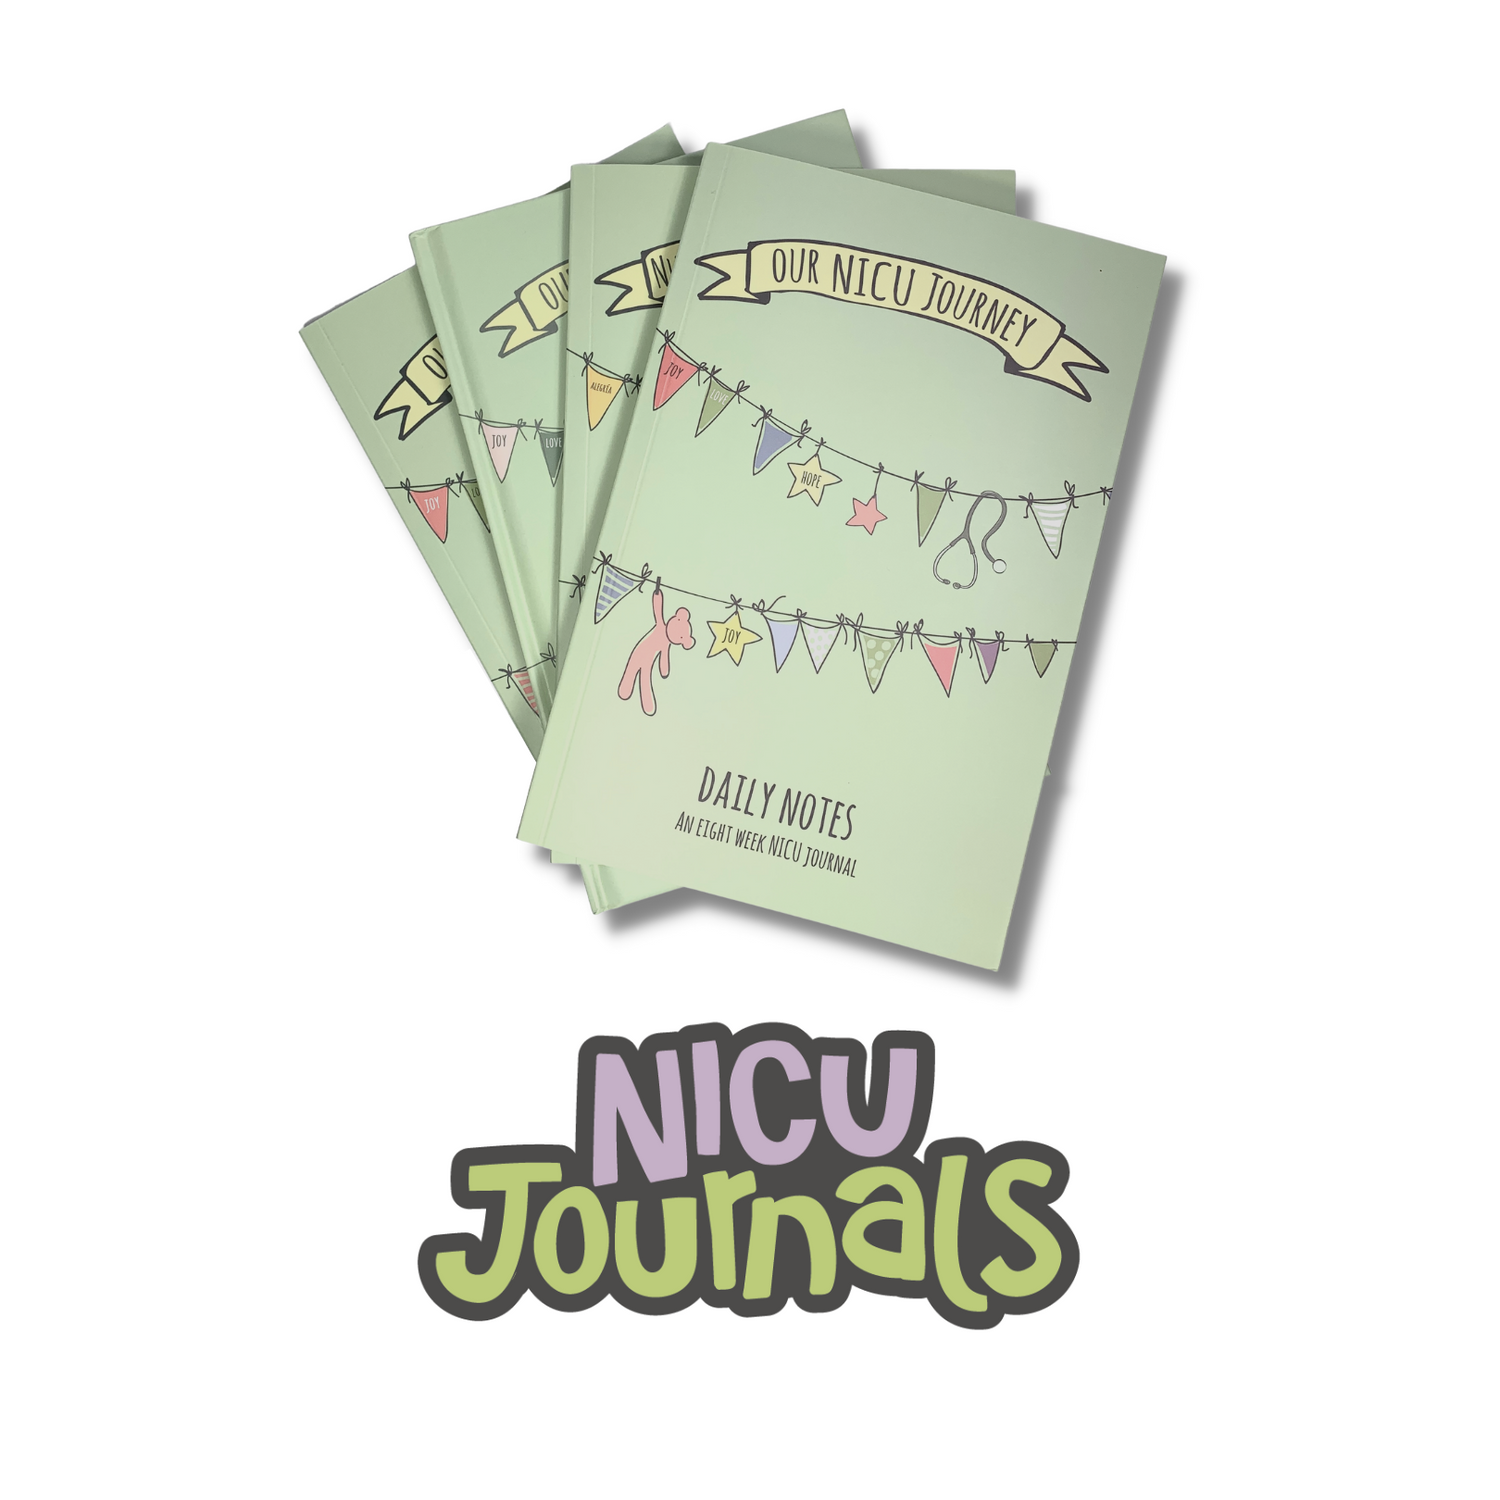 NICU Journals. Stack of four NICU journals including 8 week English NICU book in paperback and hardcover, 4 week paperback English language NICU journal, and paperback Spanish language NICU journal (Diario de la UCIN). Shop best journals by clicking this 